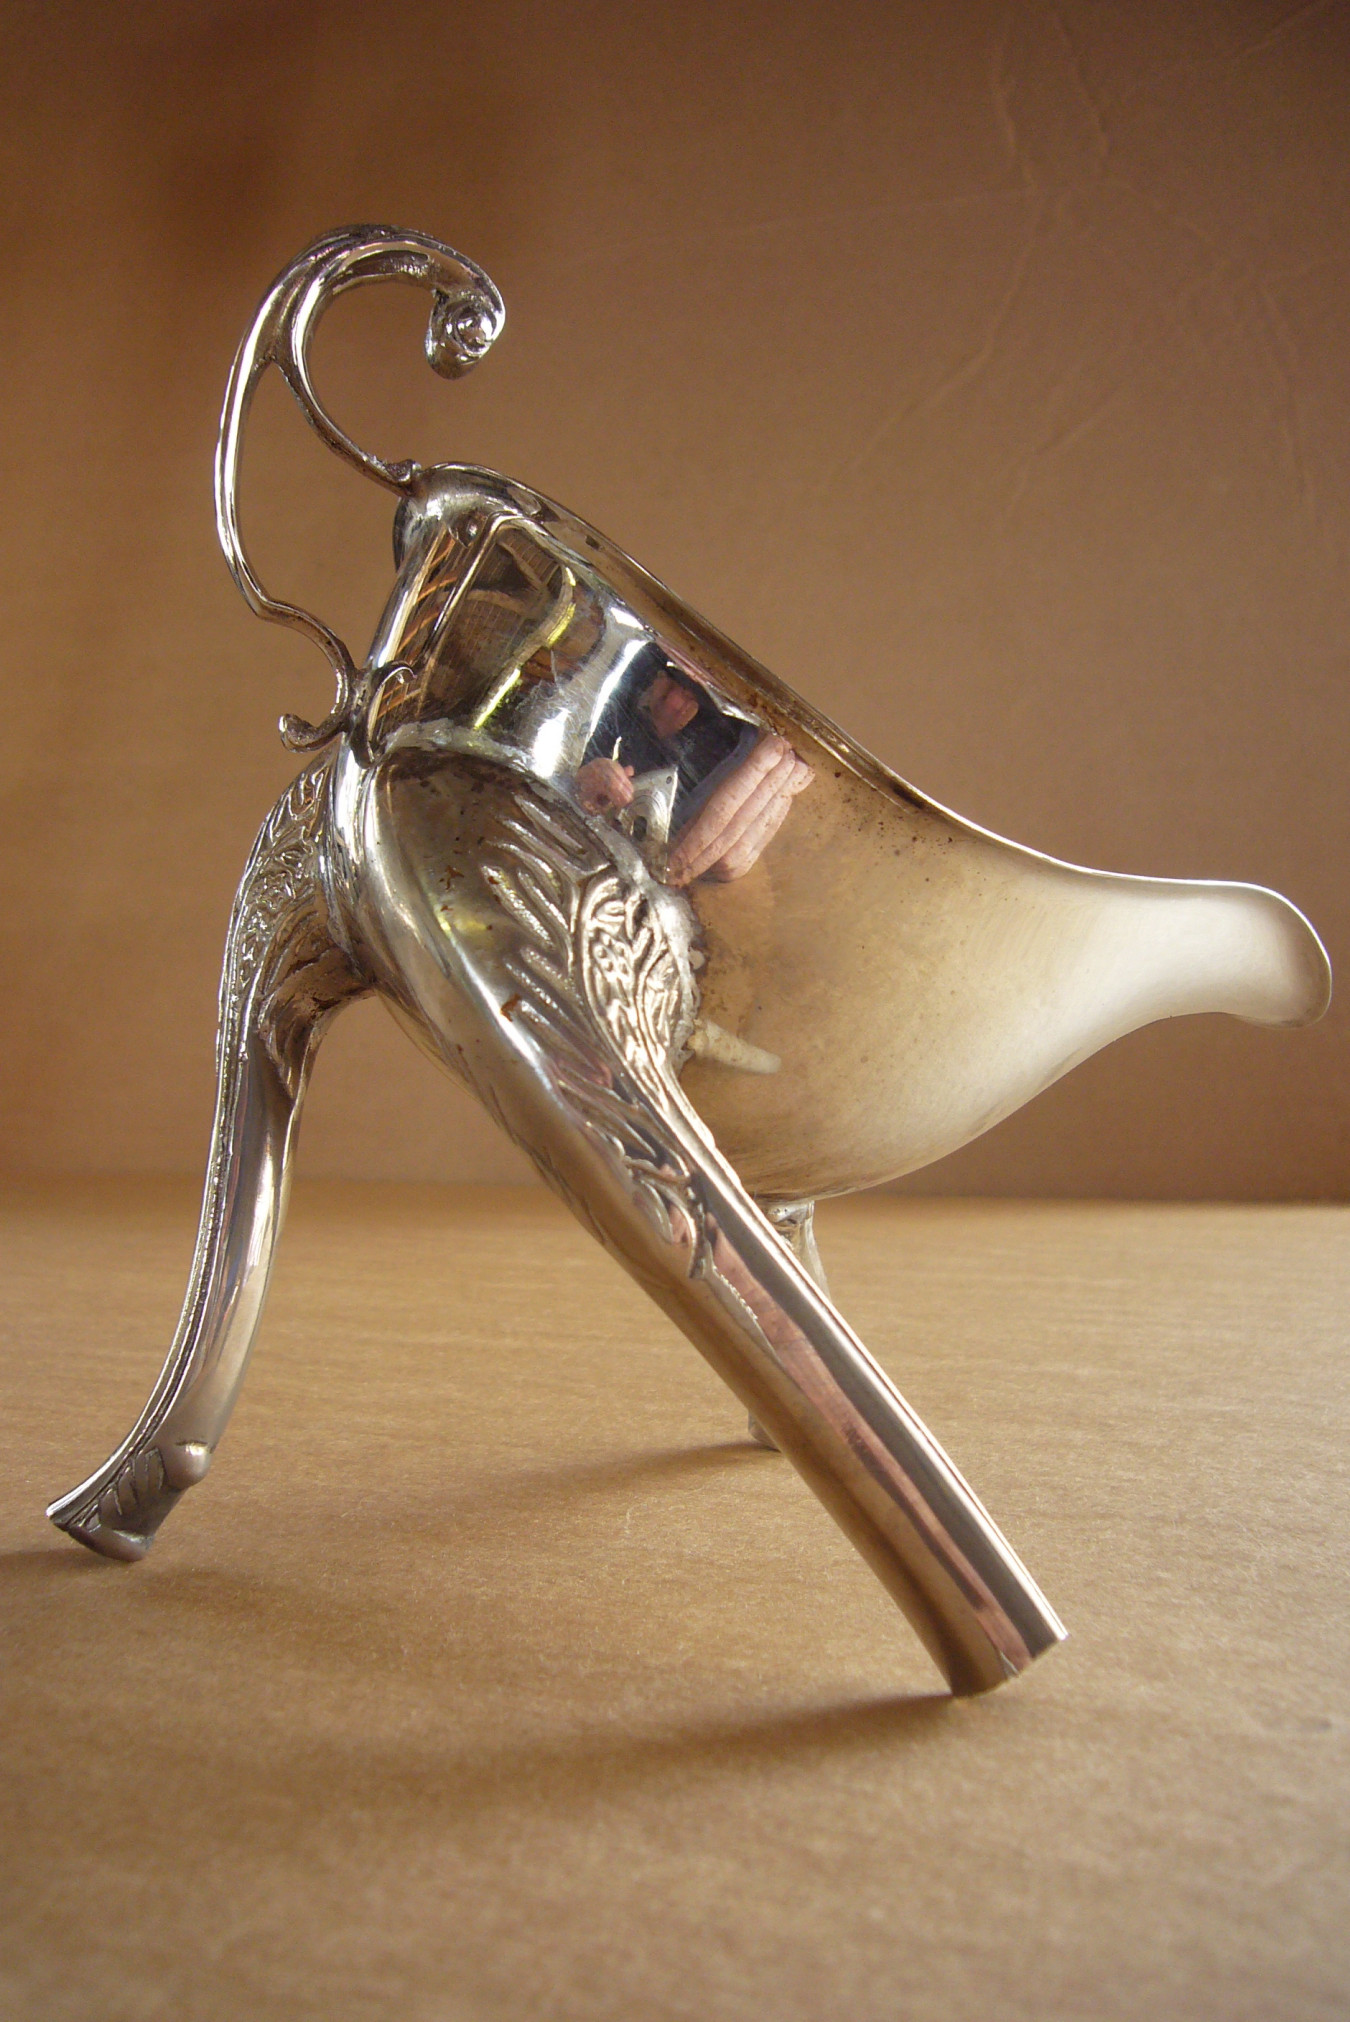 Image of a gravy boat with 3 spouts added for legs to create a monster for the table